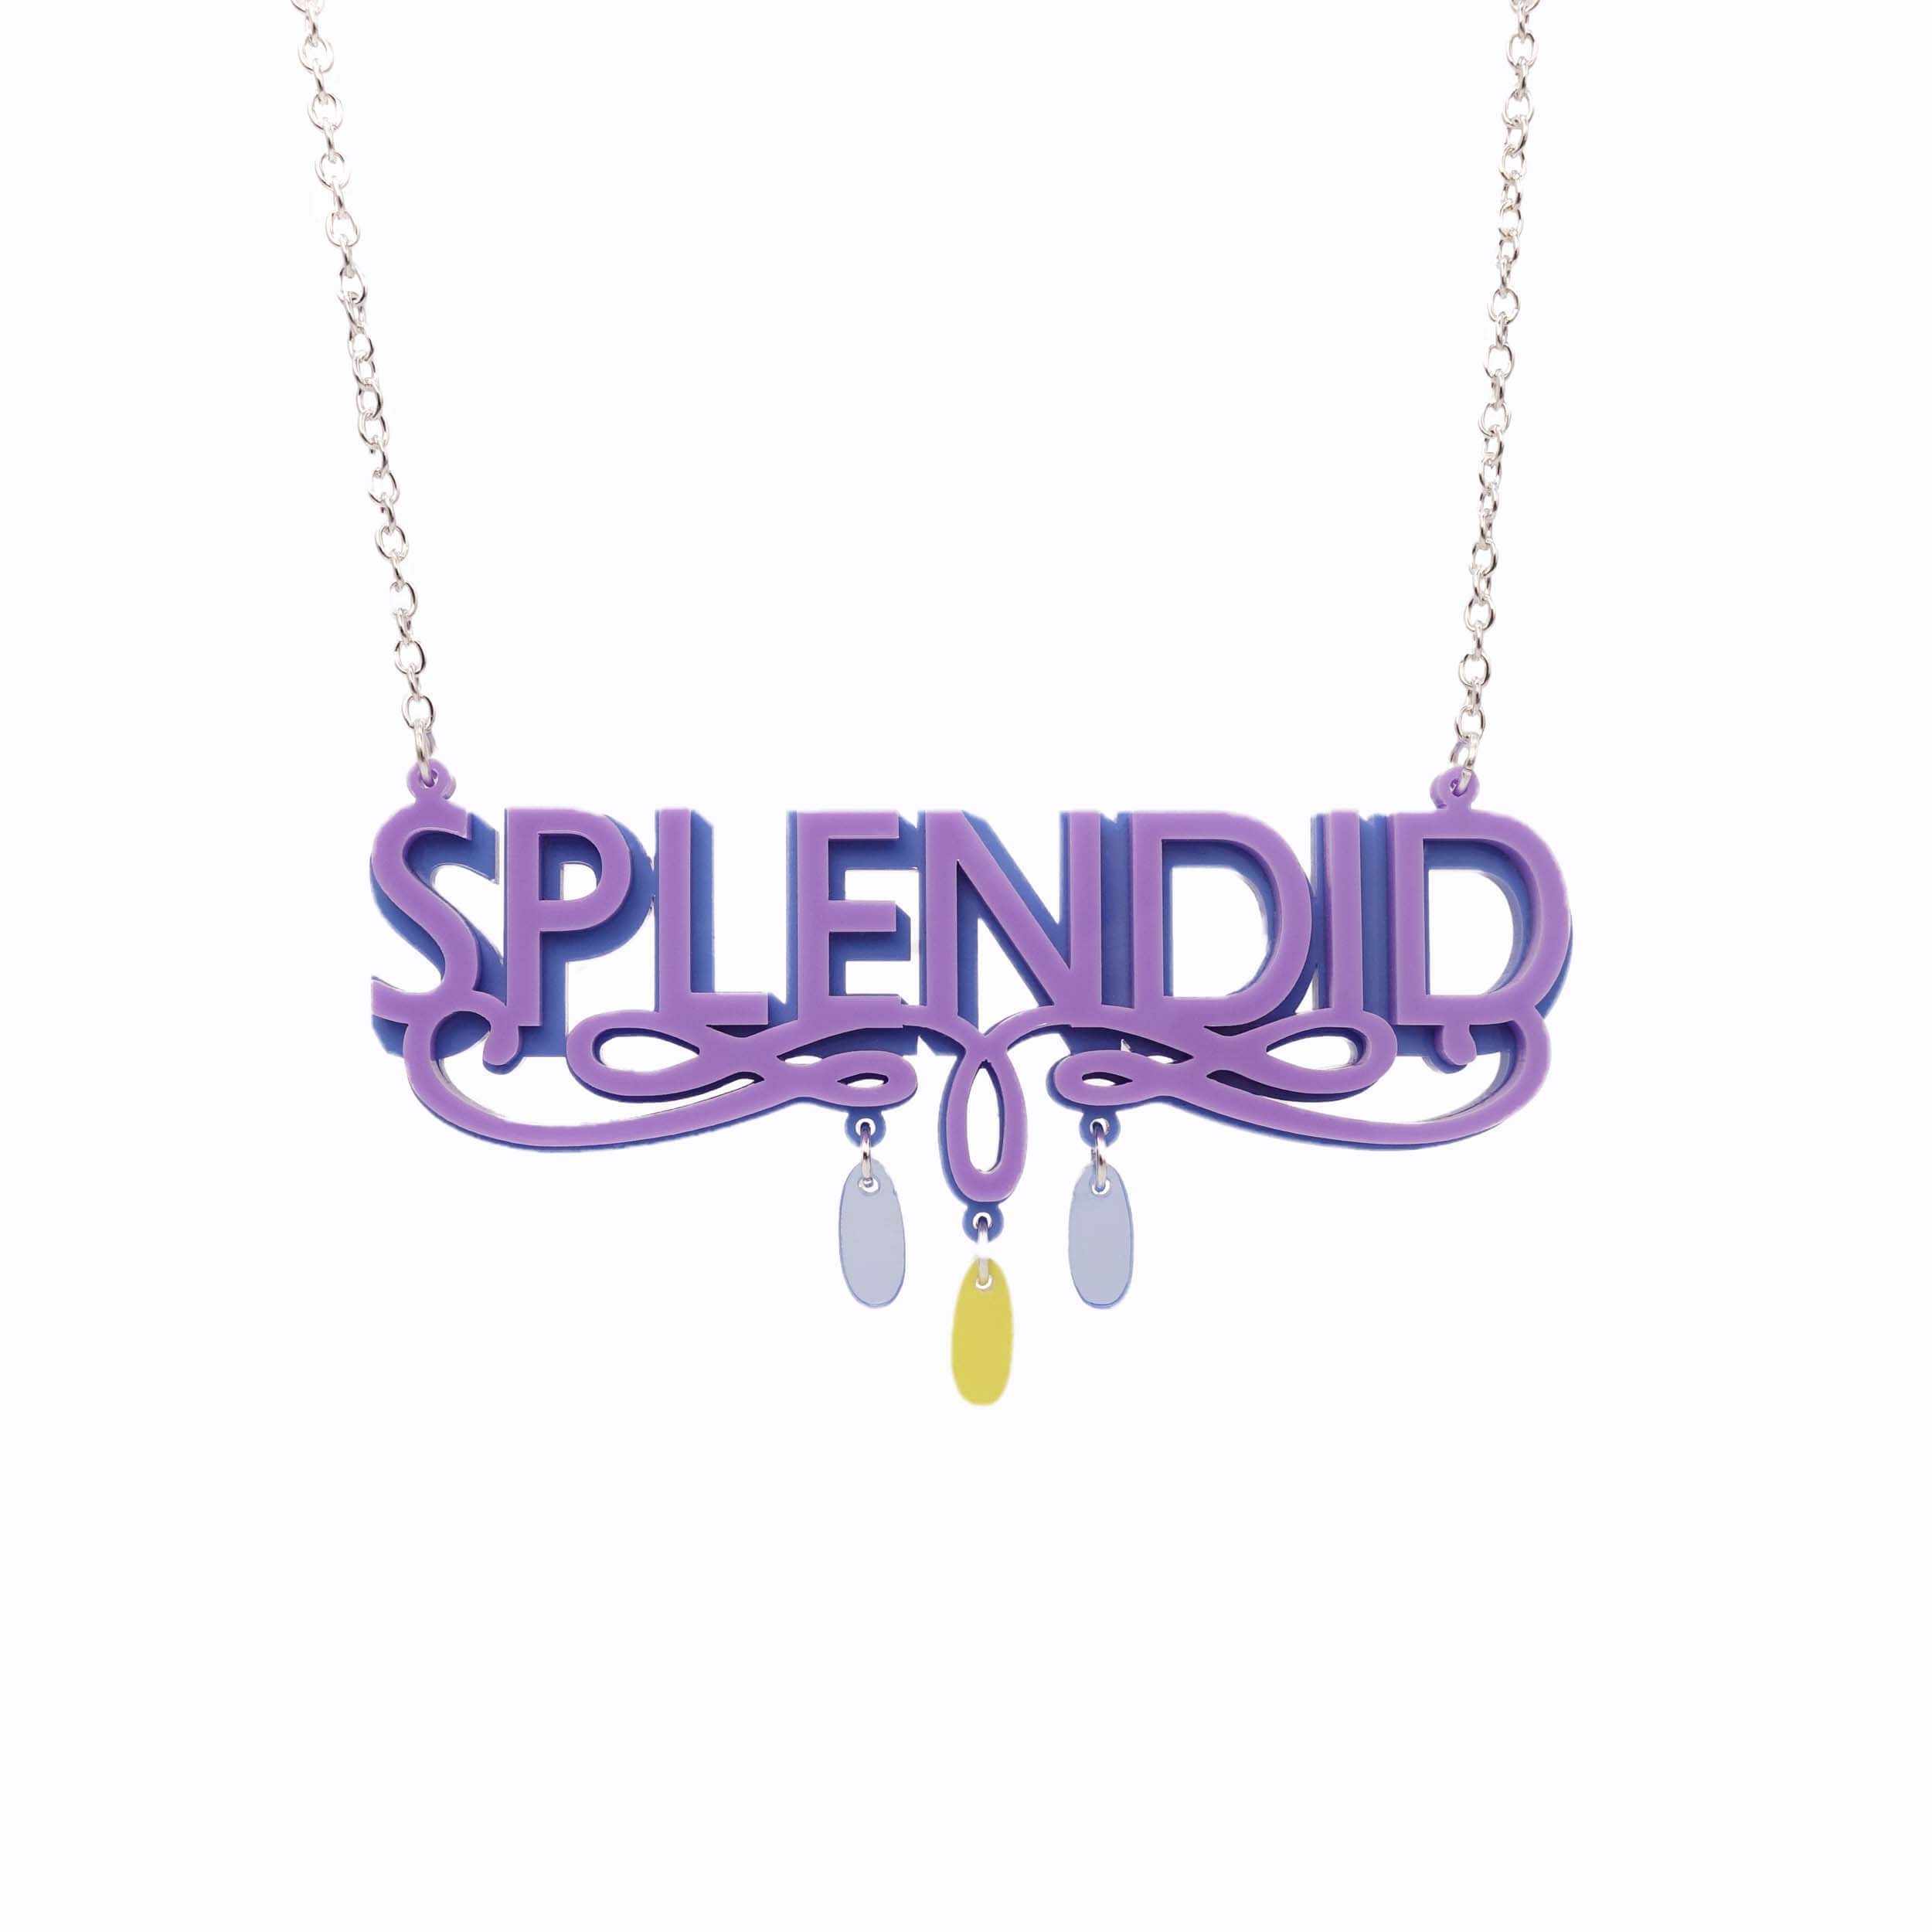 Parma violet Splendid necklace shown hanging against a white background. Designed by Sarah Day for Wear and Resist. 